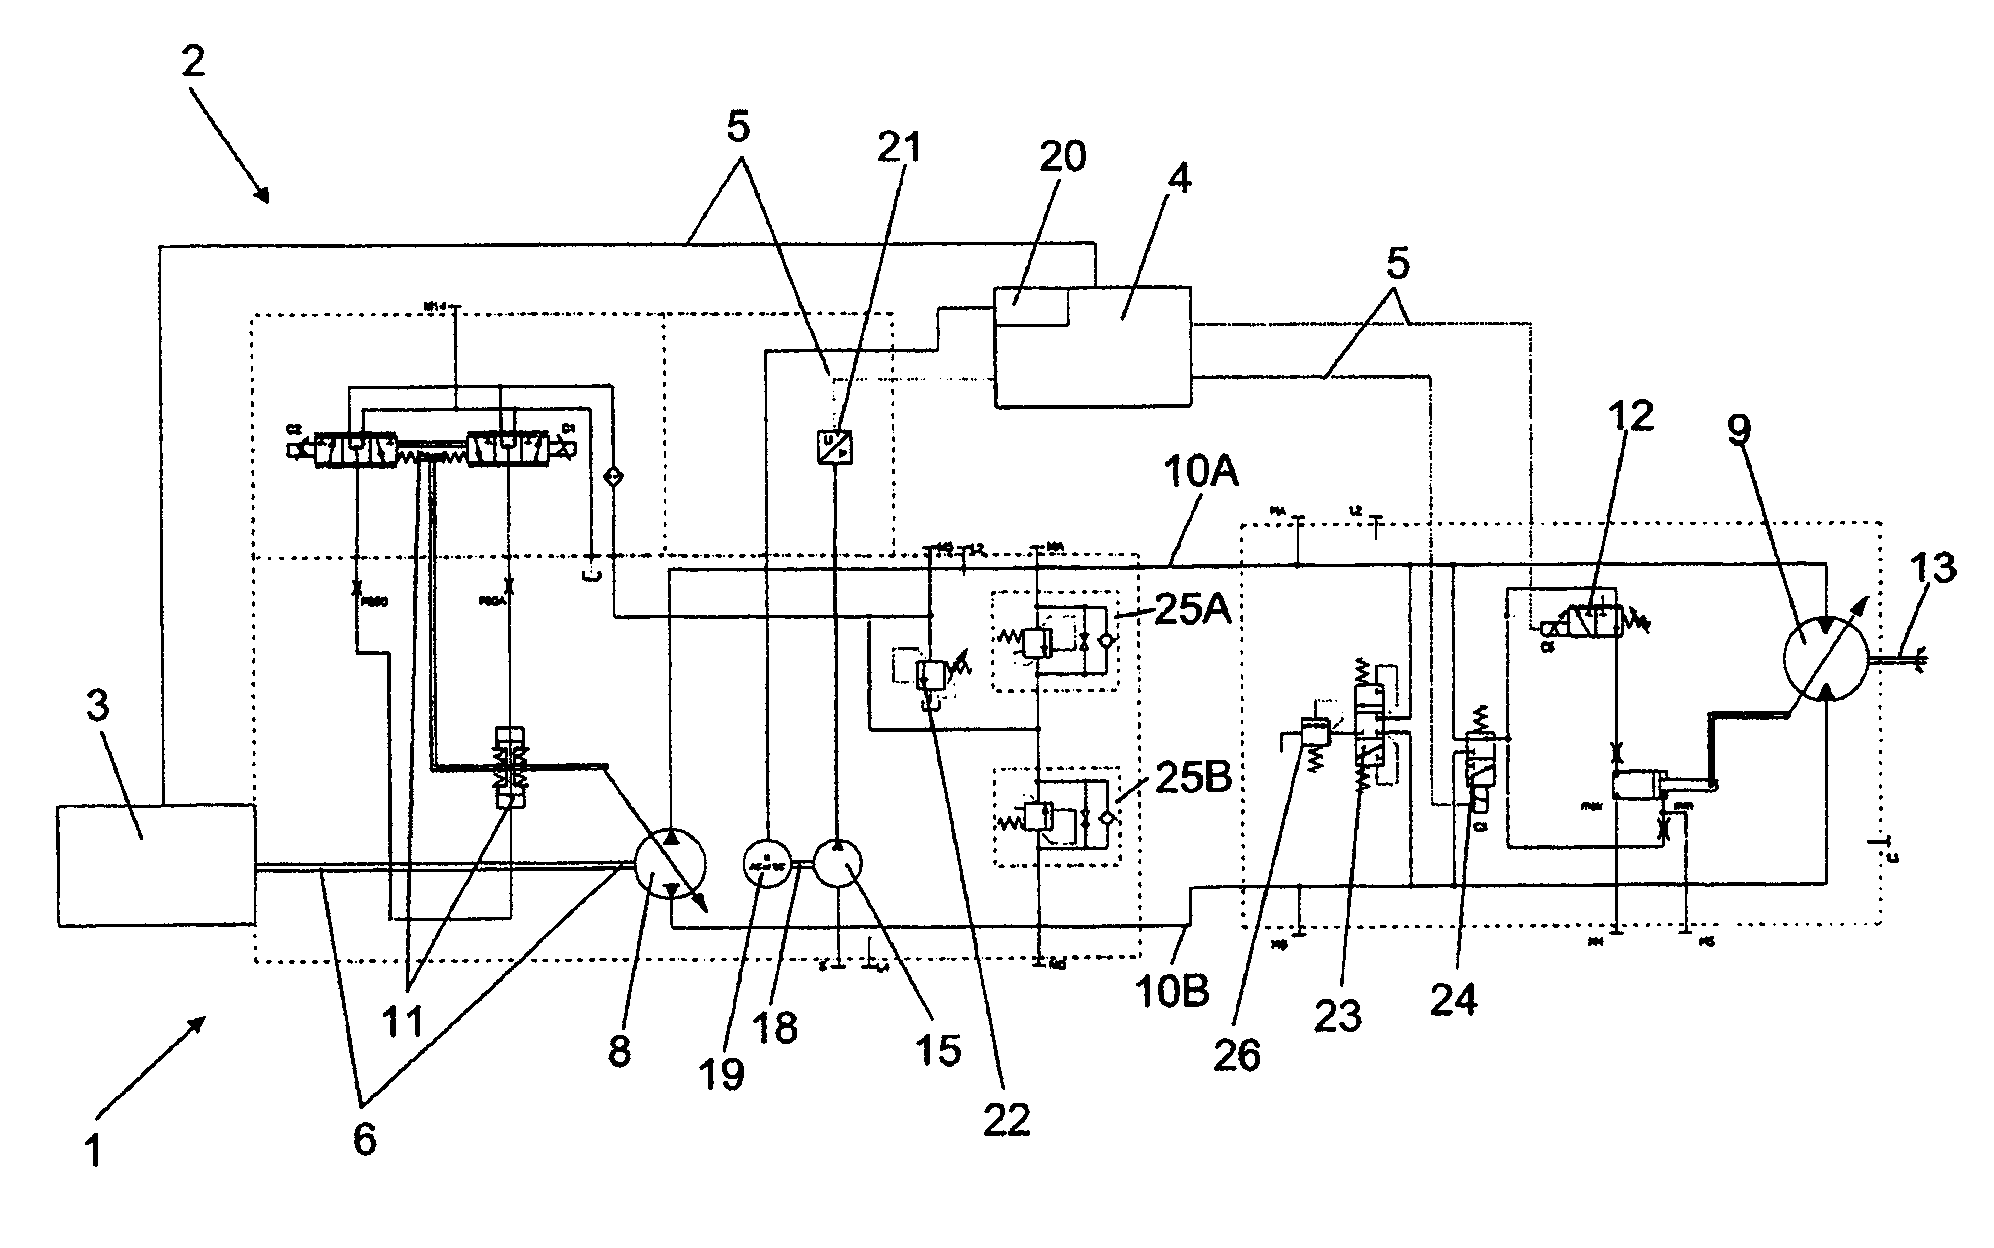 Hydraulic drive with an independent charge pump